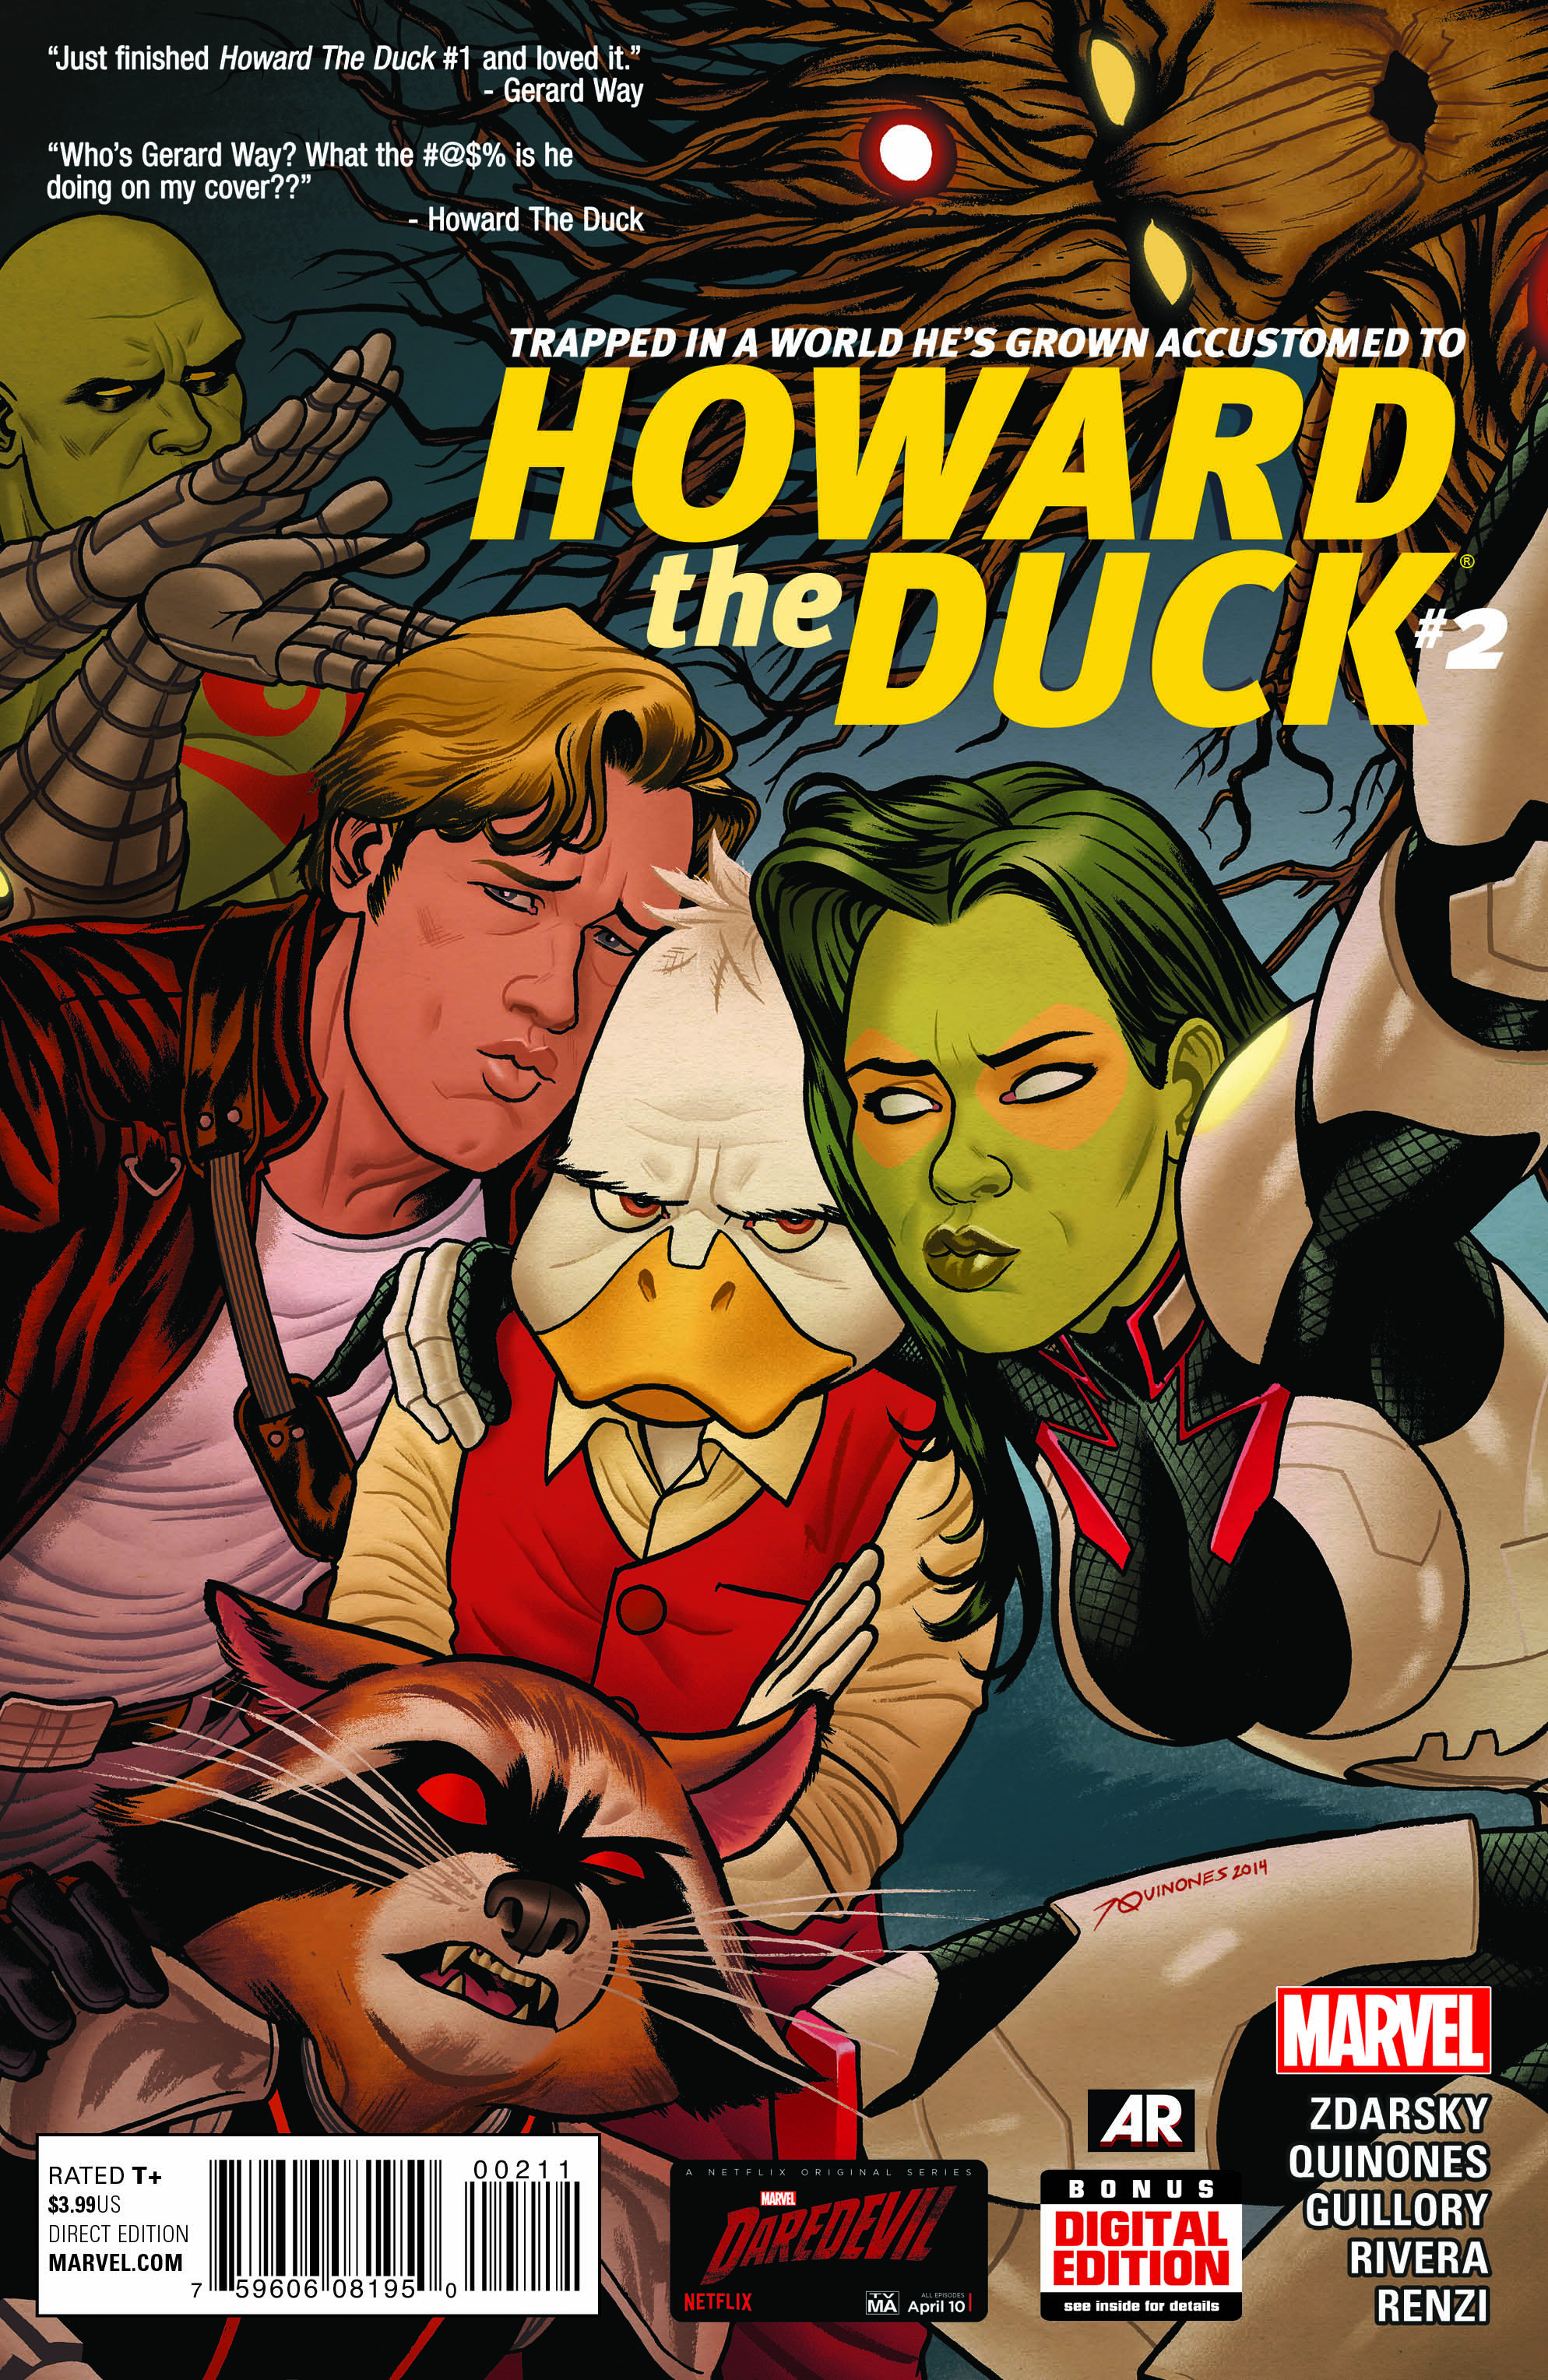 HQ Howard The Duck Wallpapers | File 1885.74Kb